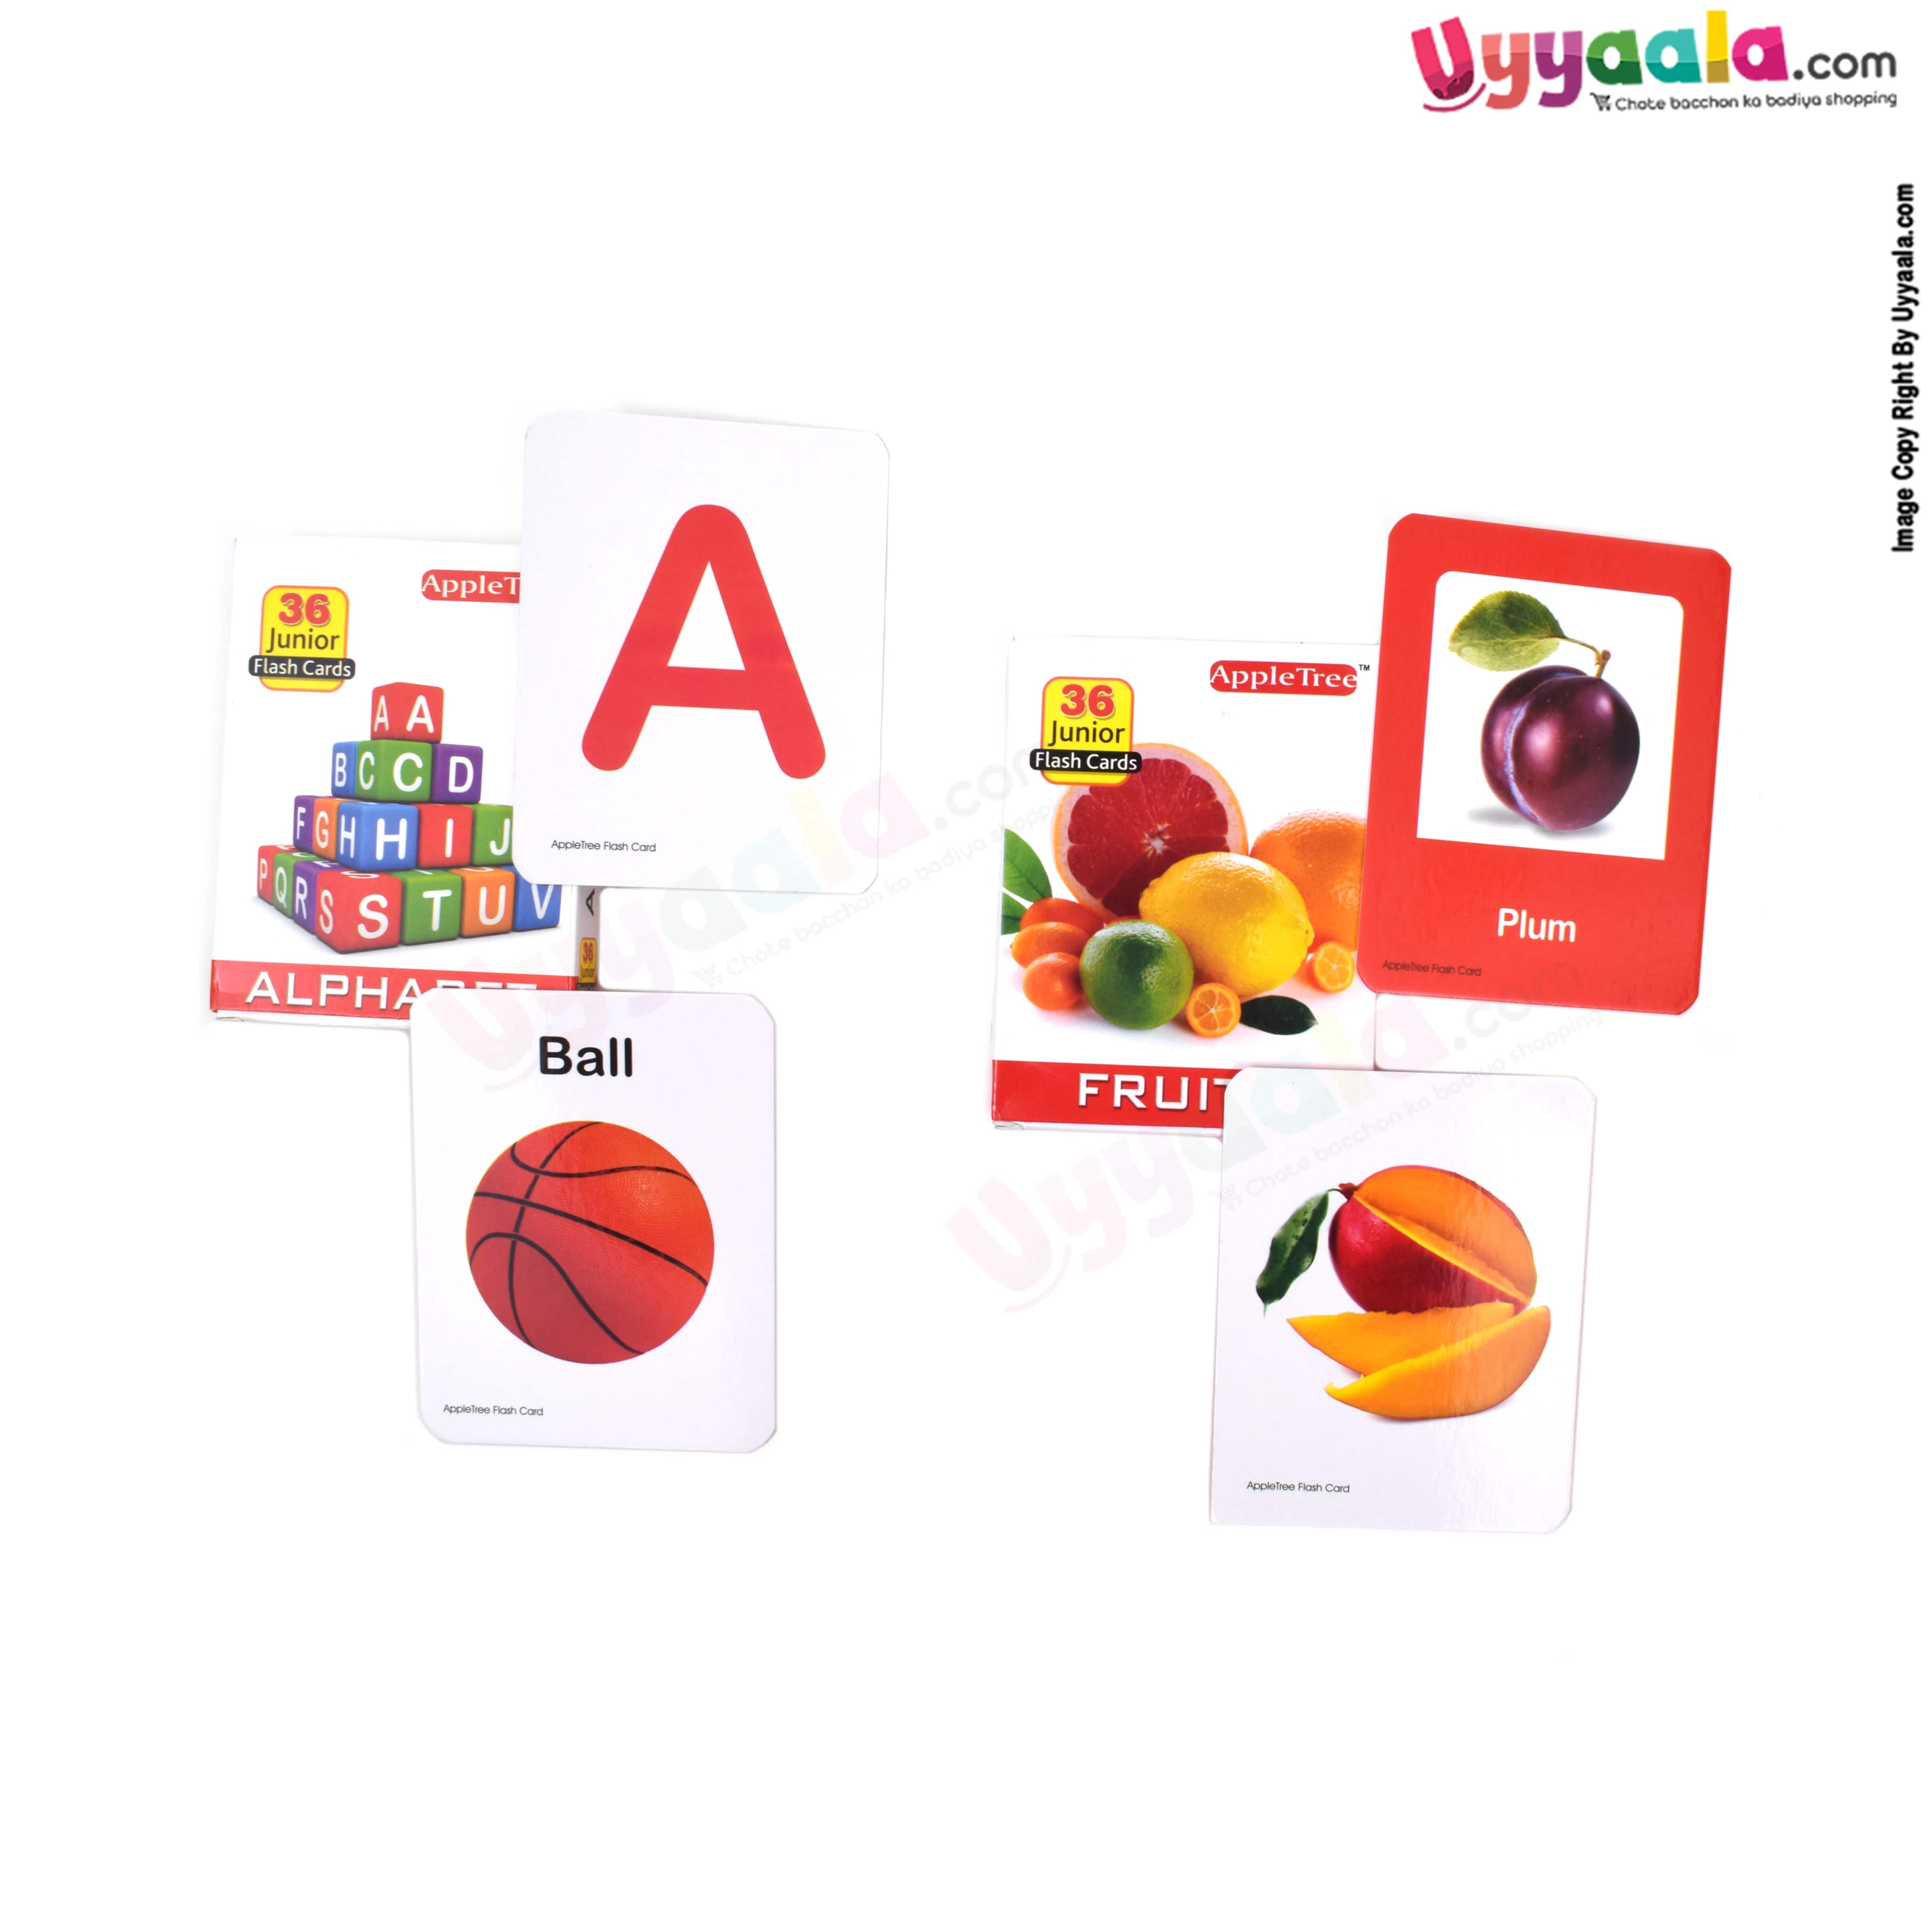 APPLE TREE junior flash cards pack of 2 - fruits & alphabets